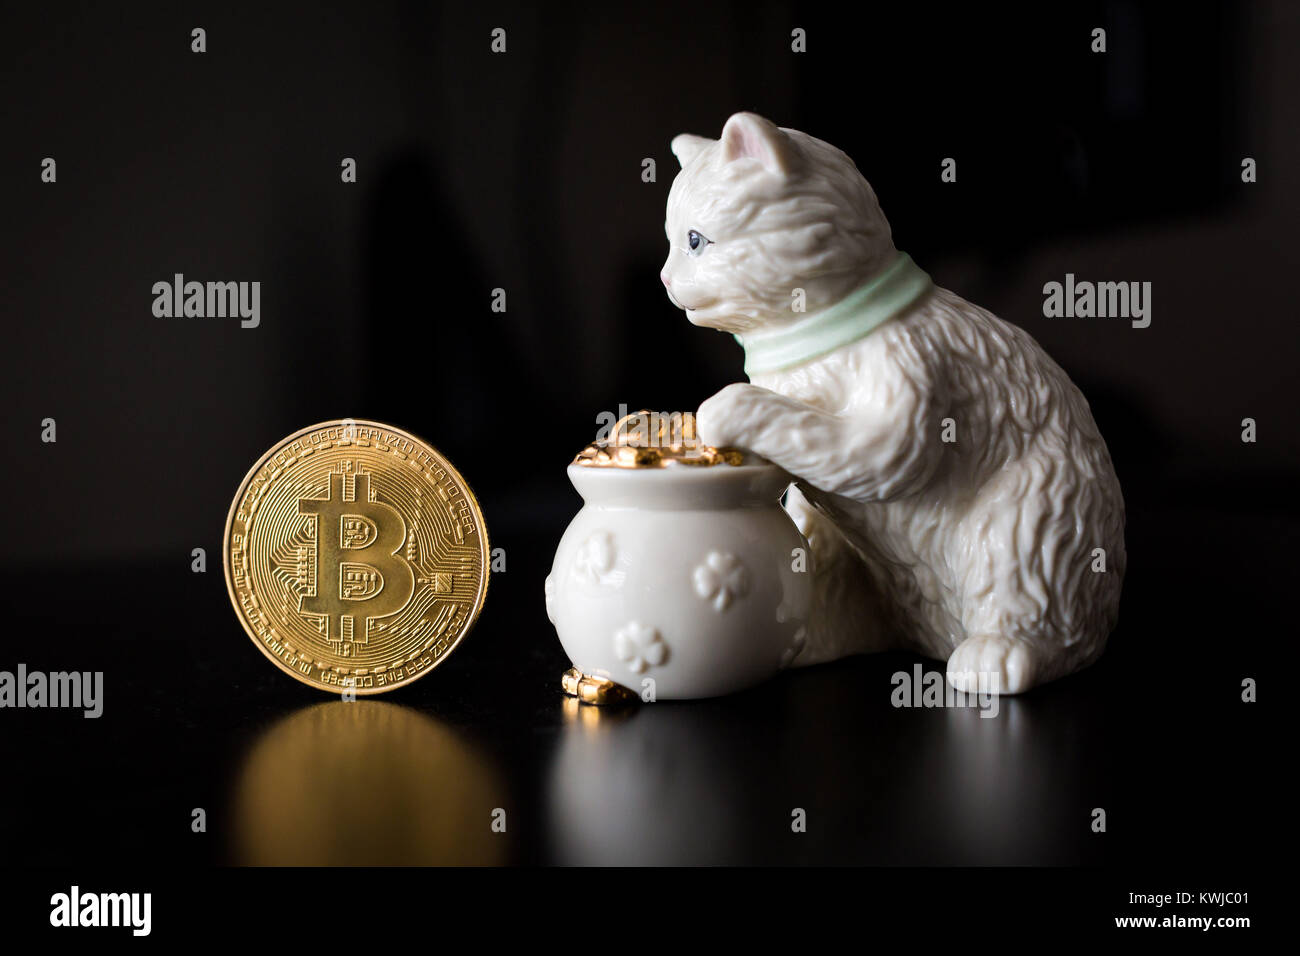 Bitcoin single coin with a cat and pot of gold Stock Photo